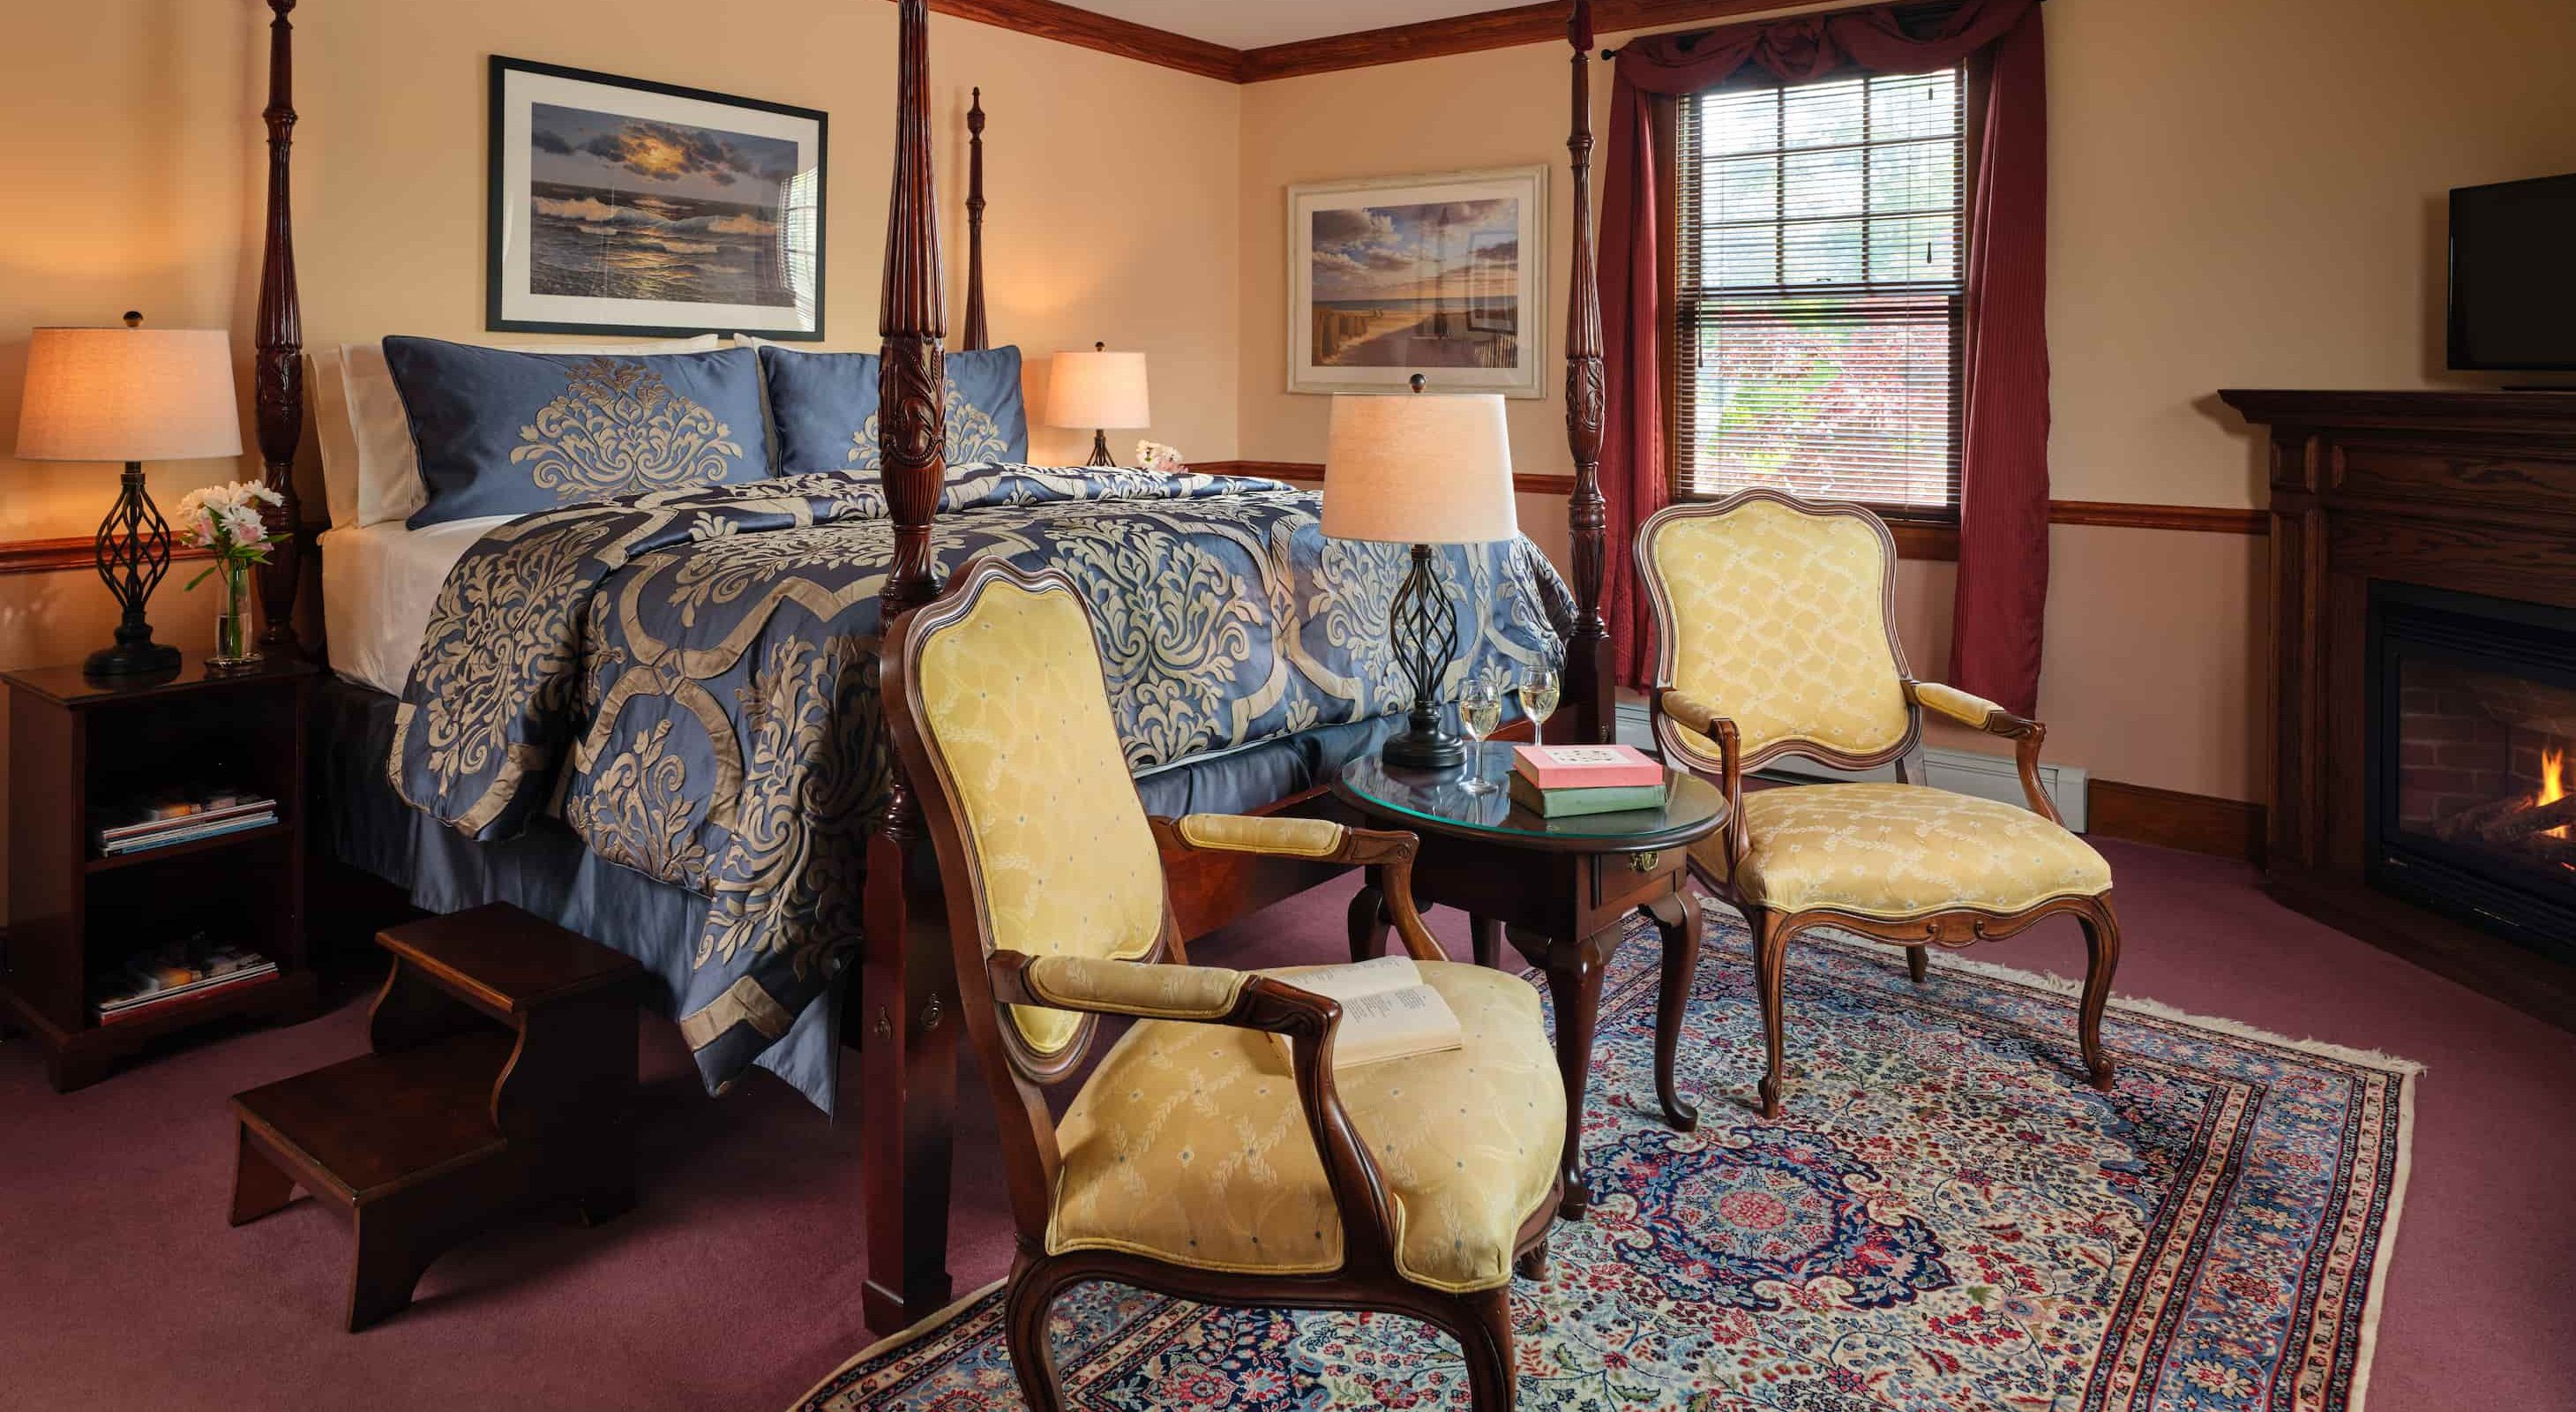 Emily Dickinson Room is the perfect place if your looking for where to stay in Falmouth, MA